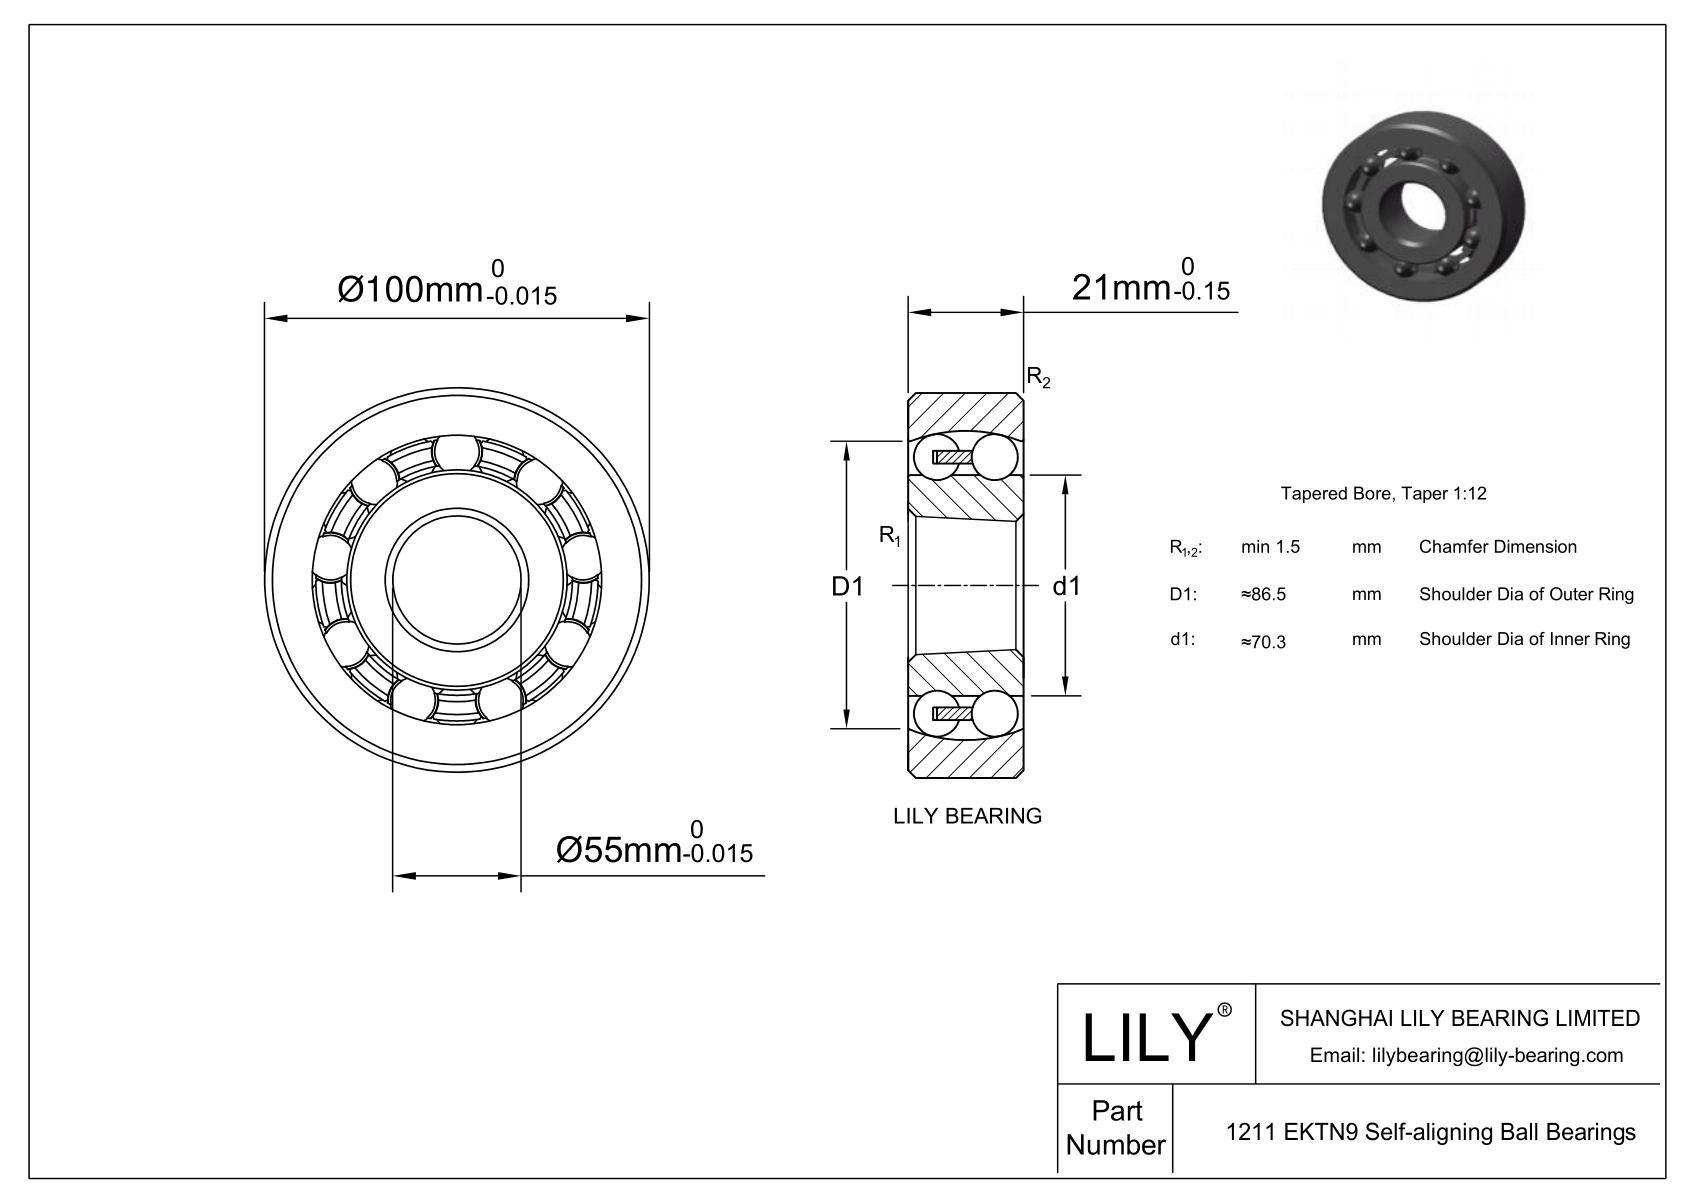 CE1211SI Silicon Nitride Self Aligning Ball Bearings cad drawing